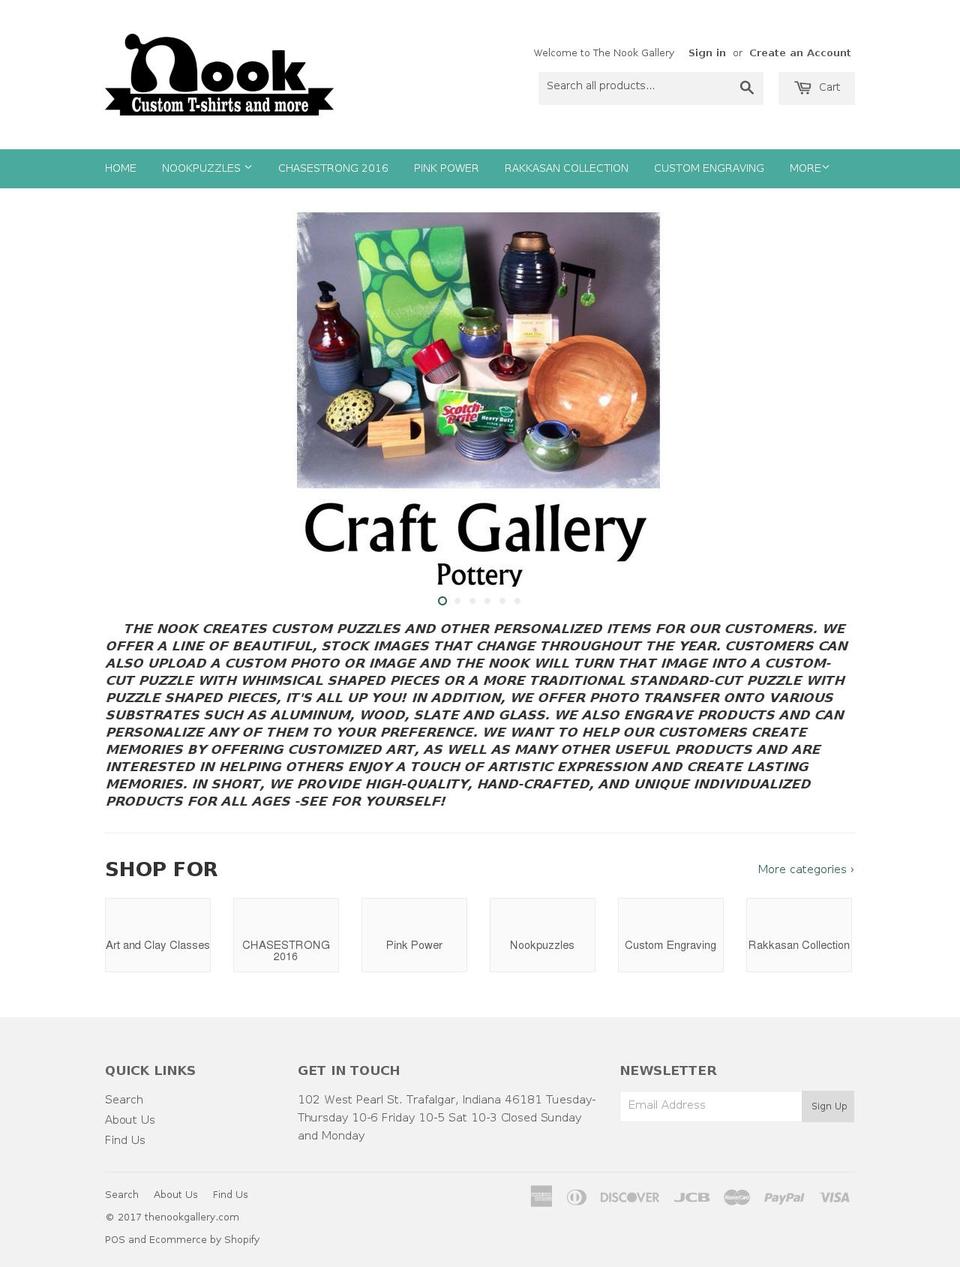 Pop Shopify theme site example thenookgallery.com